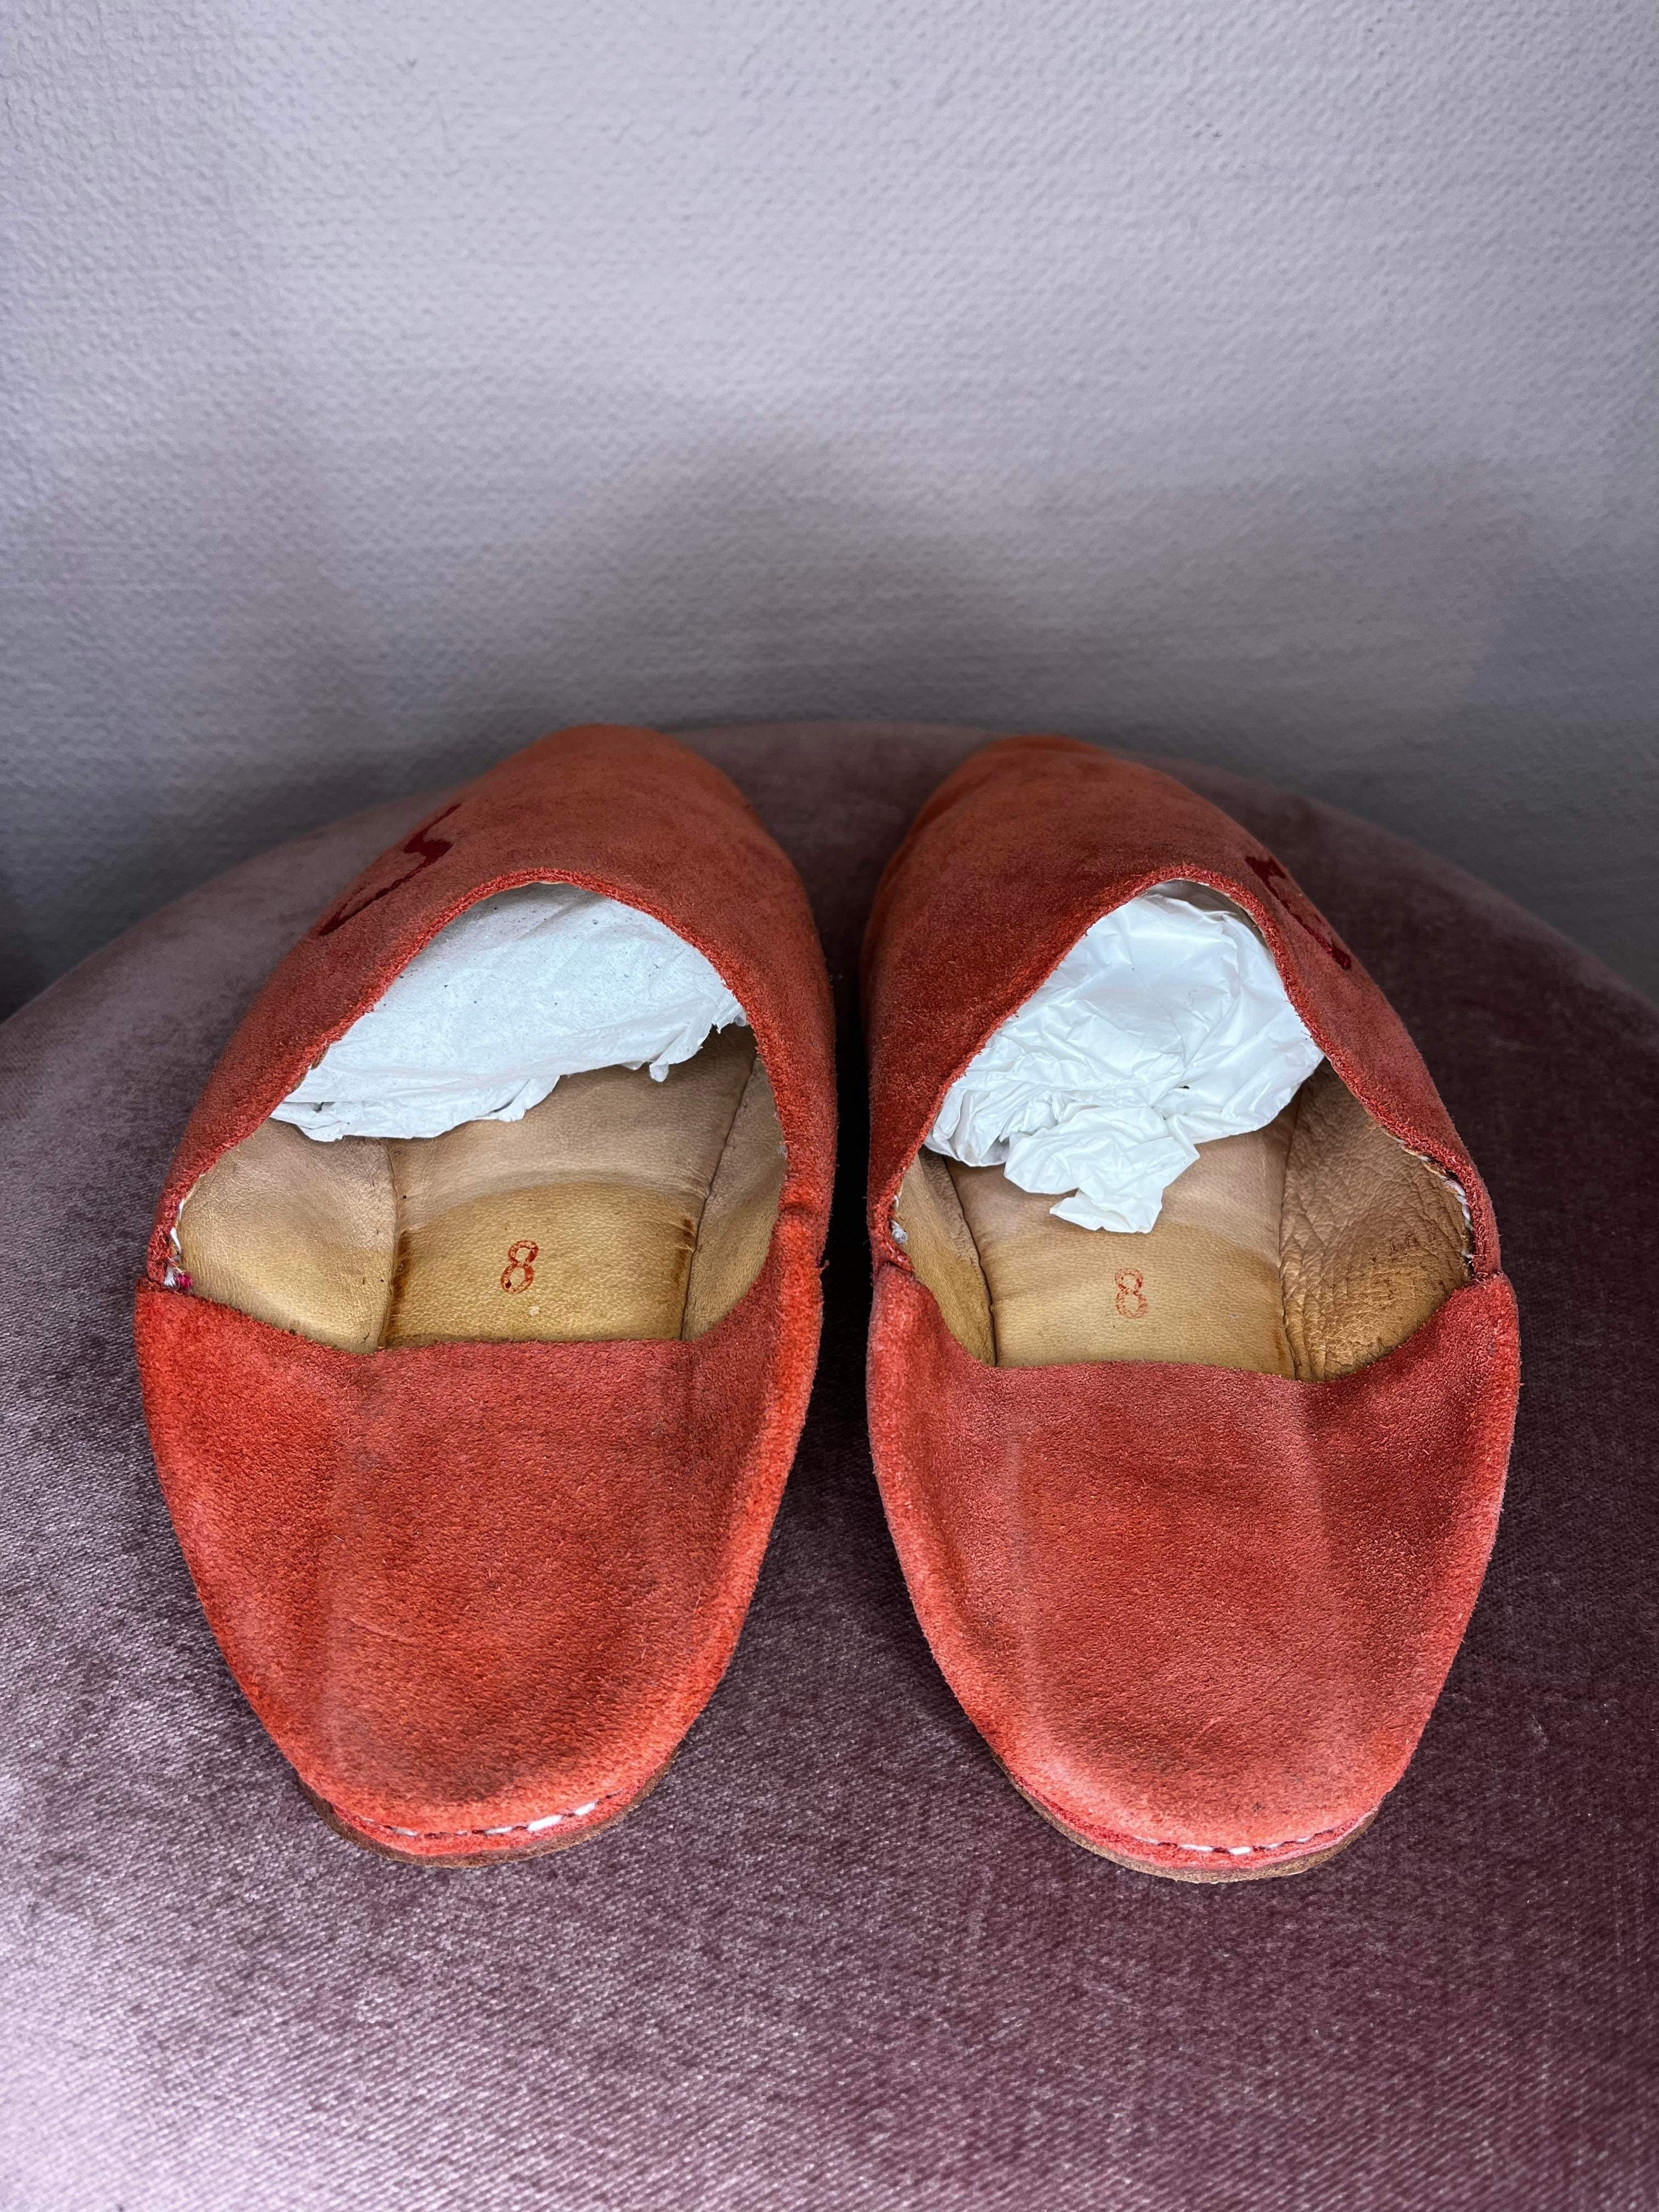 No brand - Slippers - Size: 37